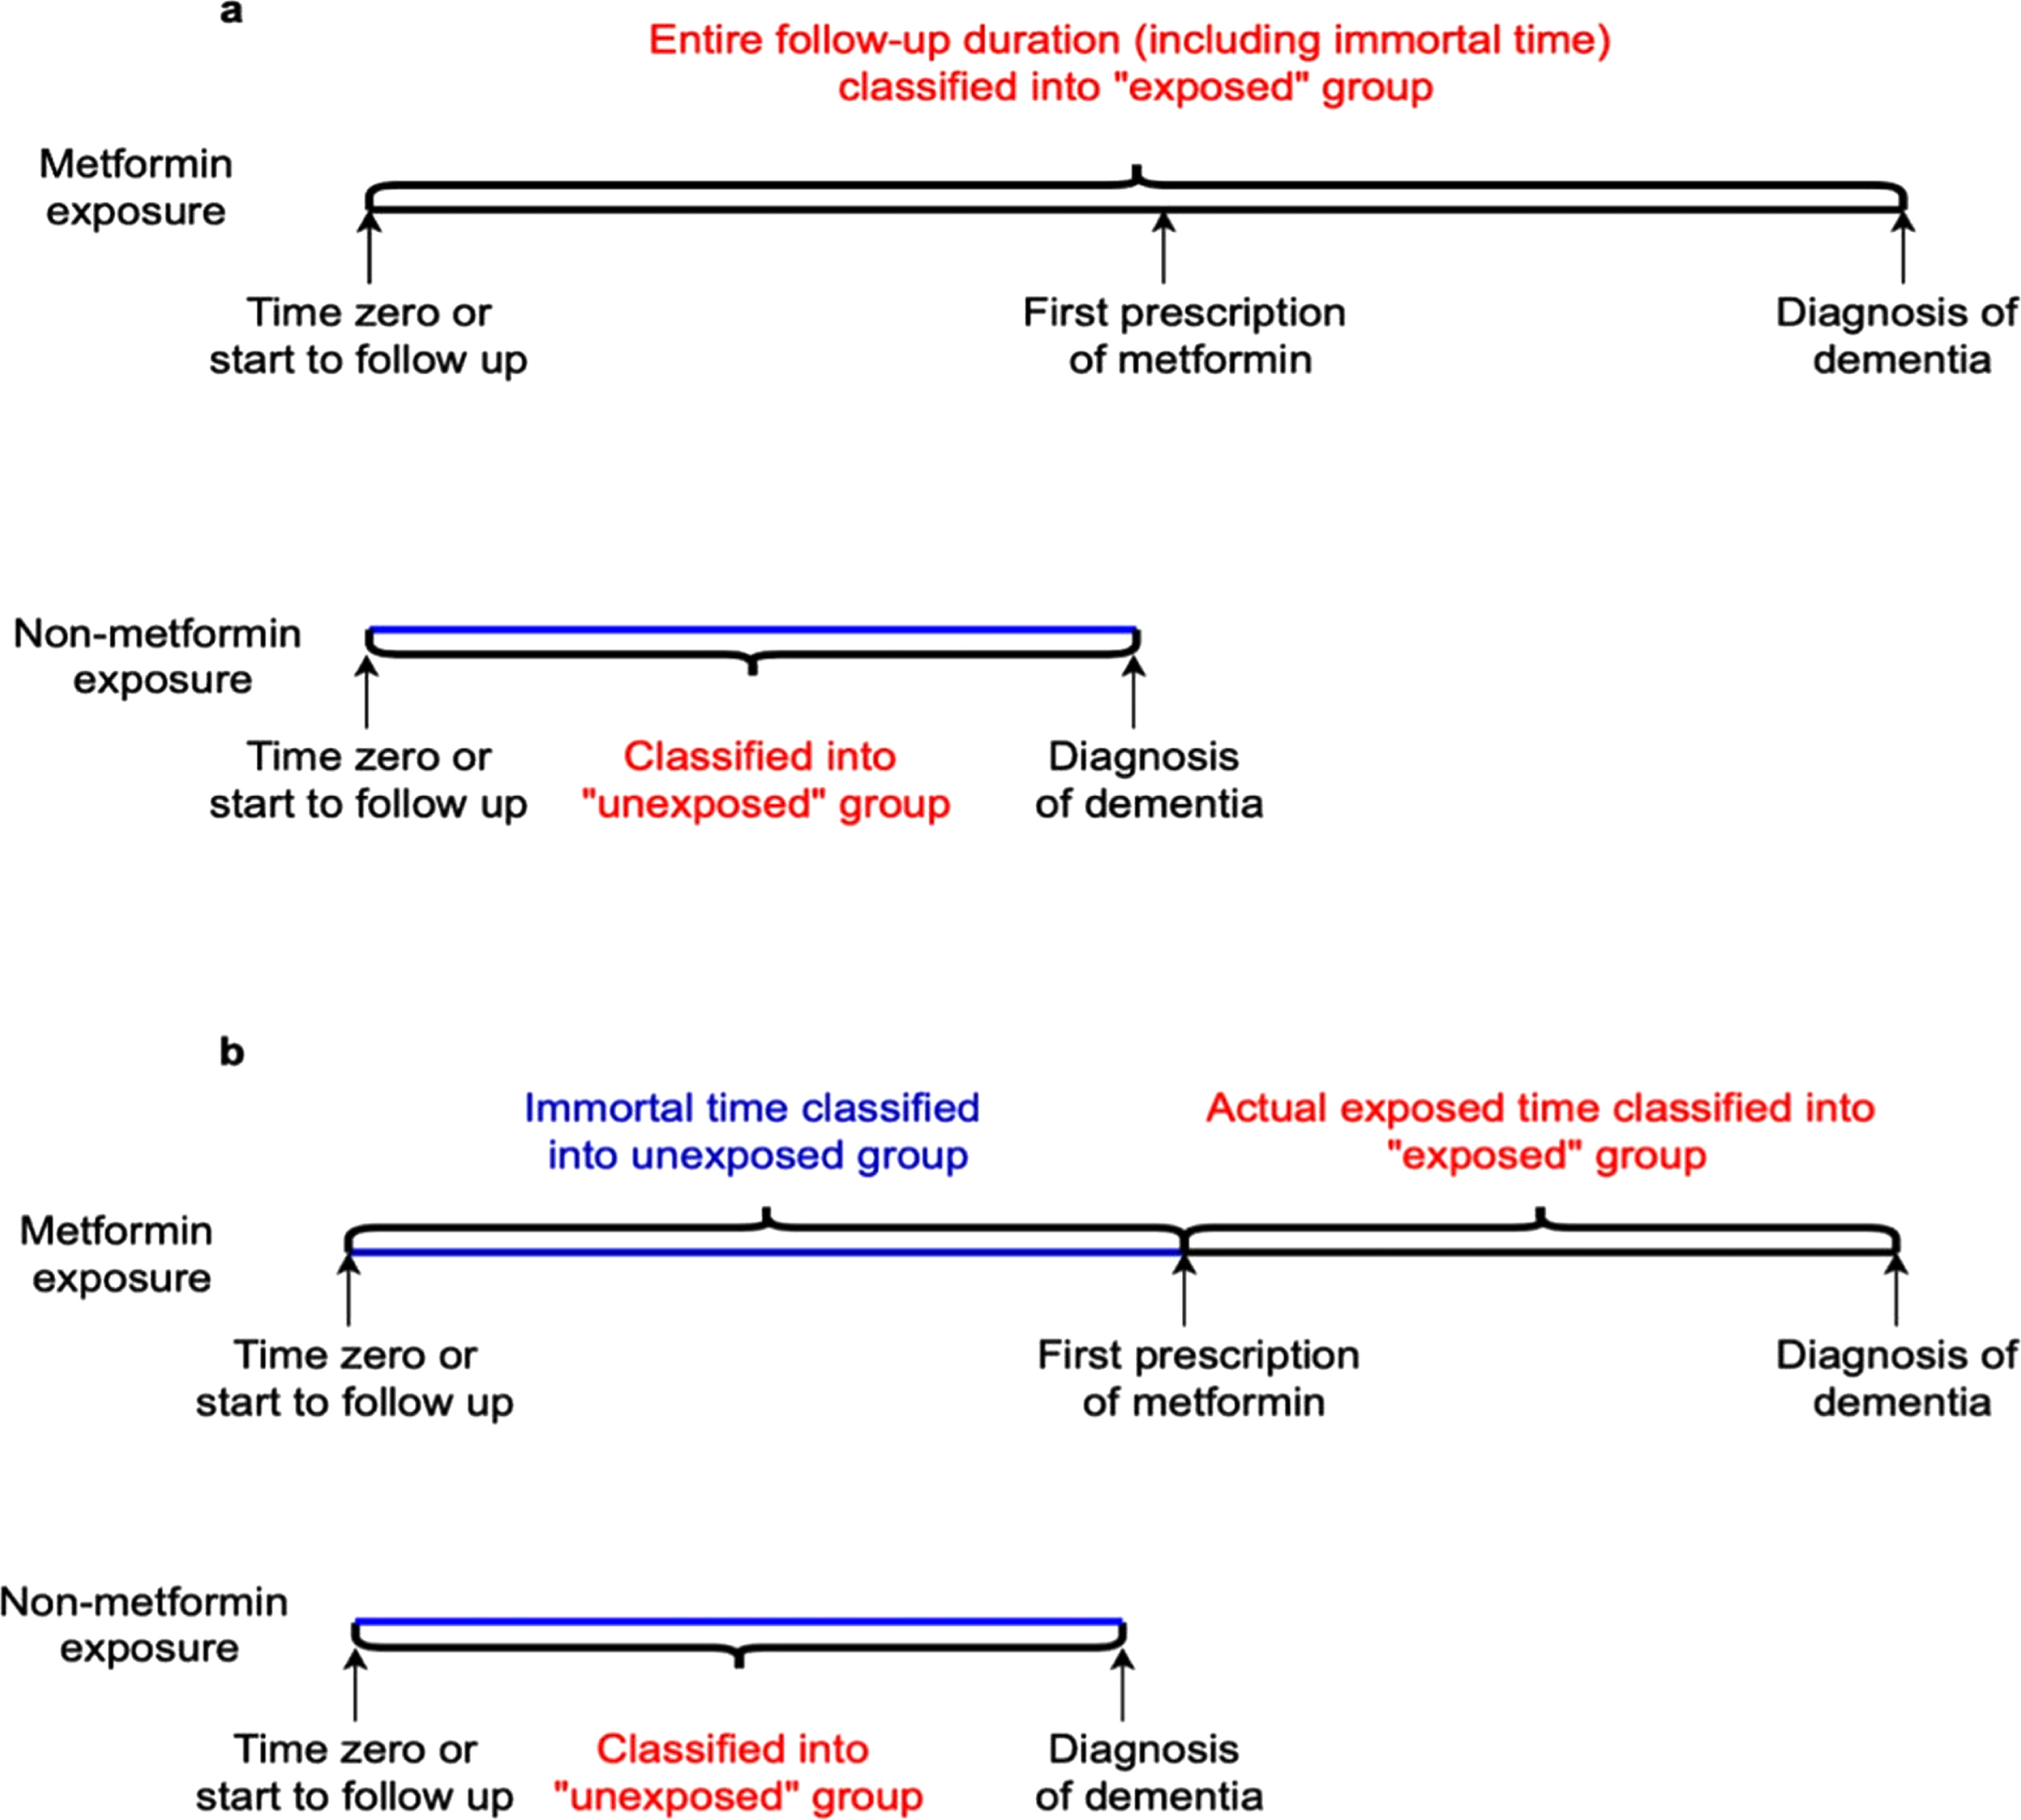 Immortal time bias. a) The entire follow-up duration, including immortal time, is classified into the exposure group, leading to immortal time bias, which can incorrectly show metformin having a protective effect on dementia risk. b) Immortal person time in the exposure group was classified into the unexposed group, showing a proper method to classify exposed and unexposed groups at time zero.